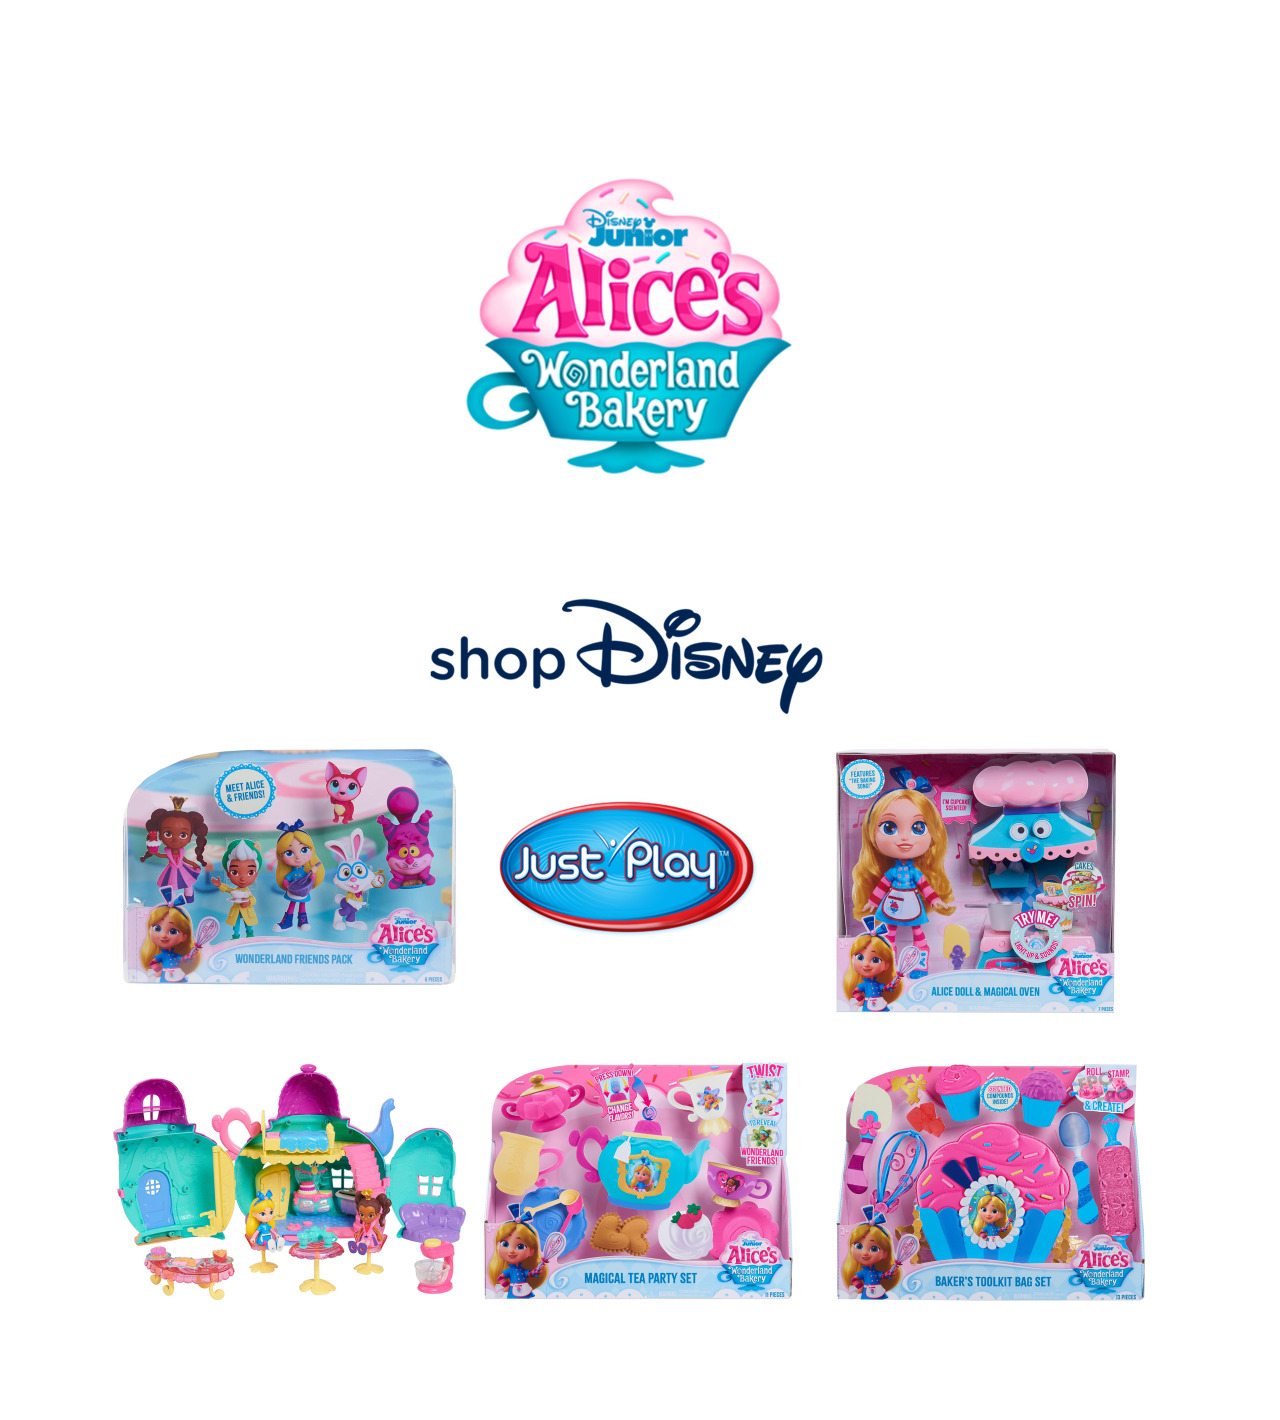 Alice's Wonderland Bakery dolls and toys from Just Play 